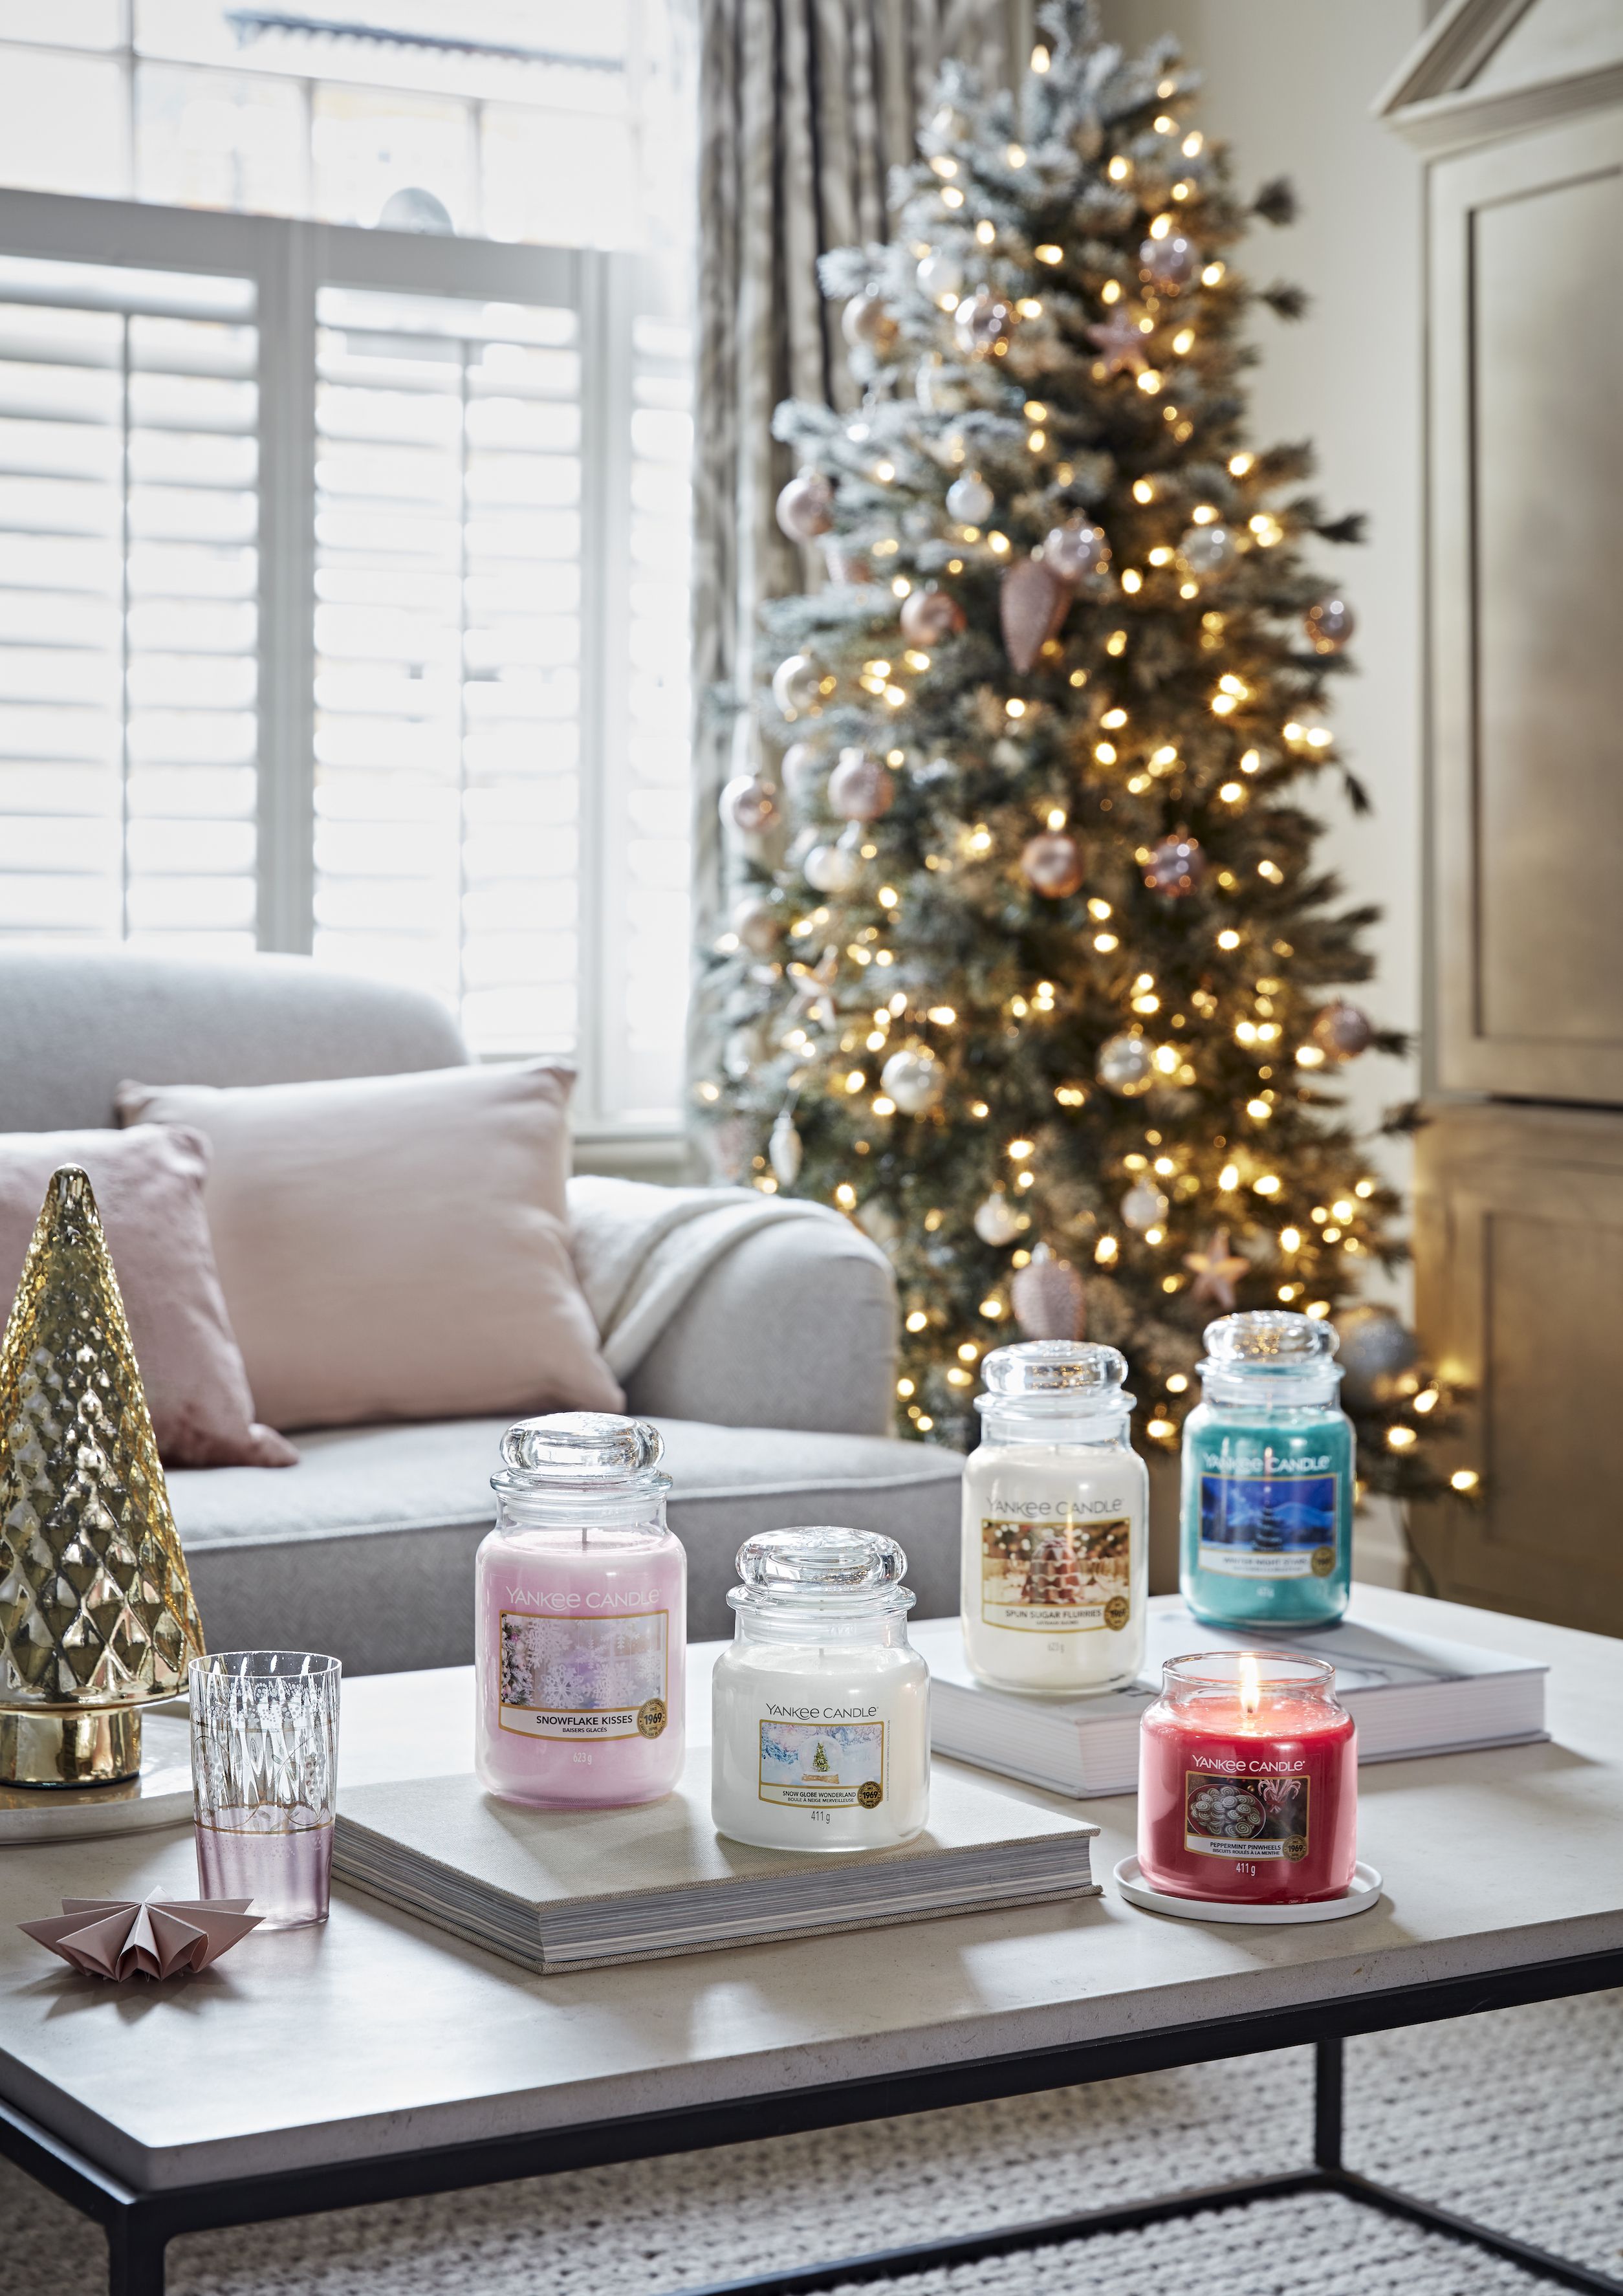 Yankee Candle Christmas Collection 2022